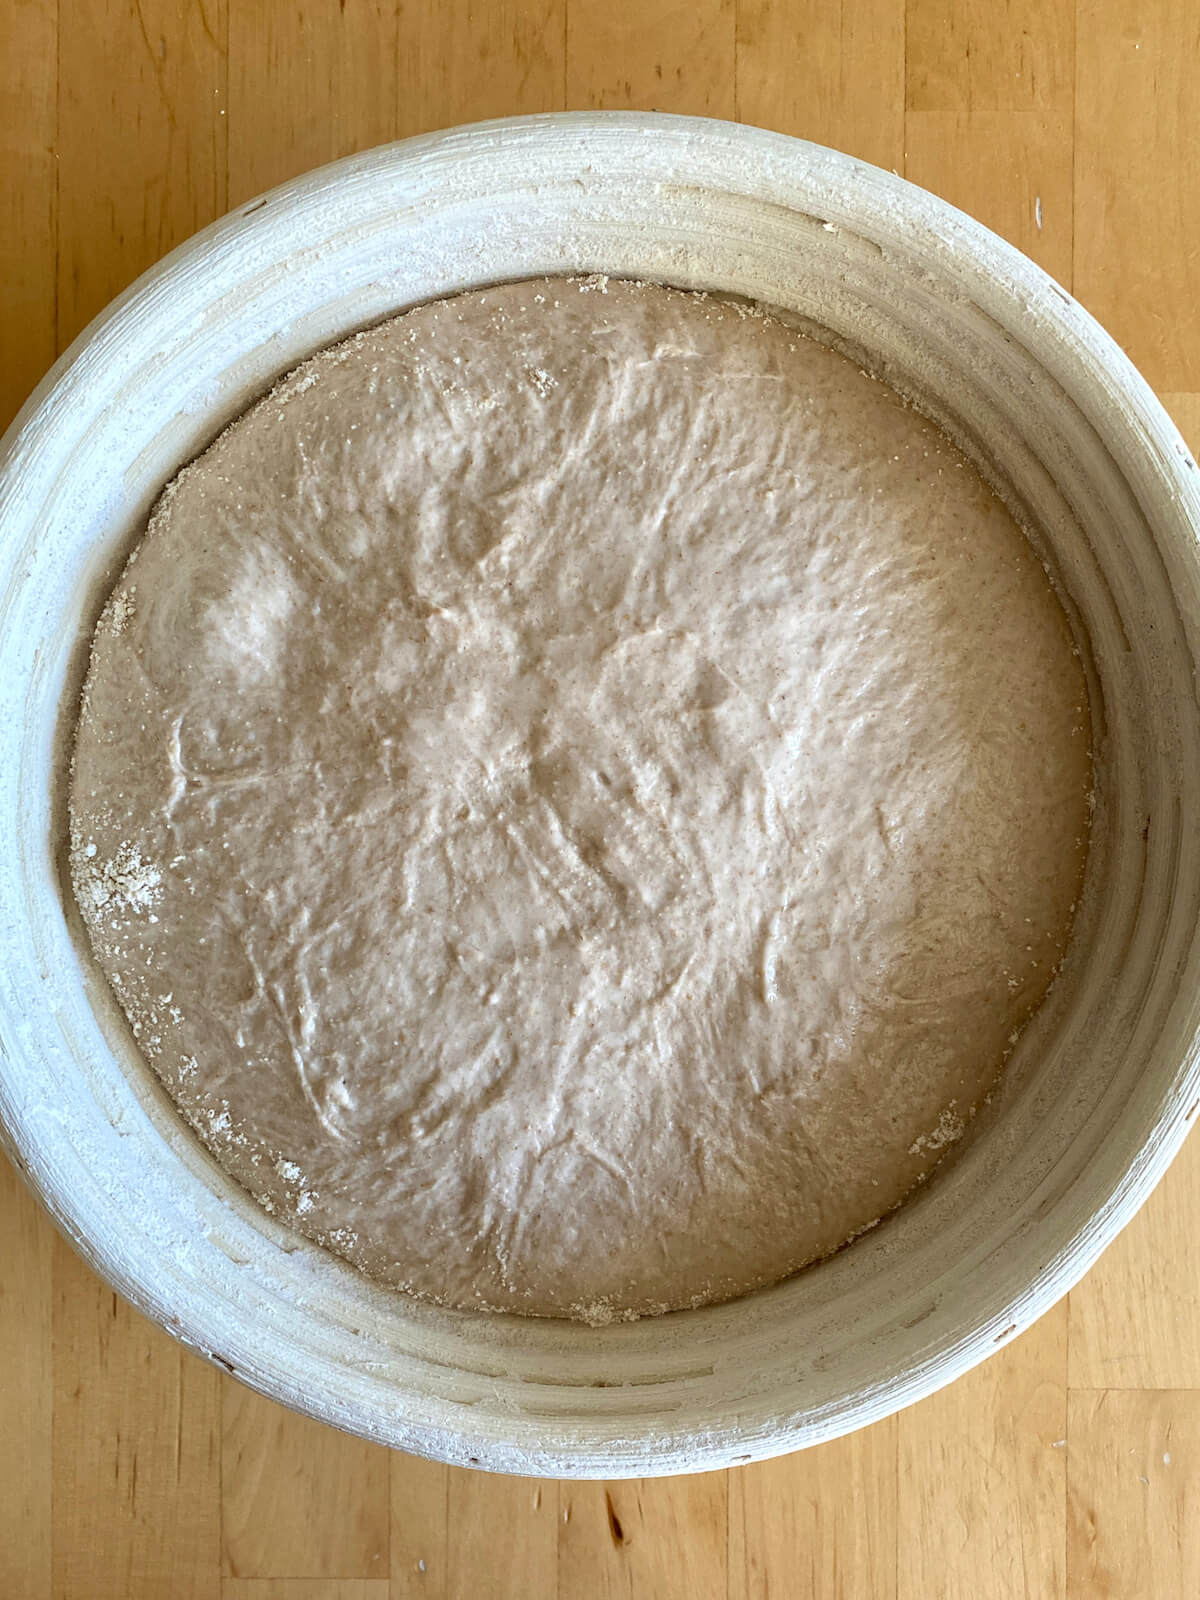 The dough after proofing and cold retarding in the refrigerator overnight.